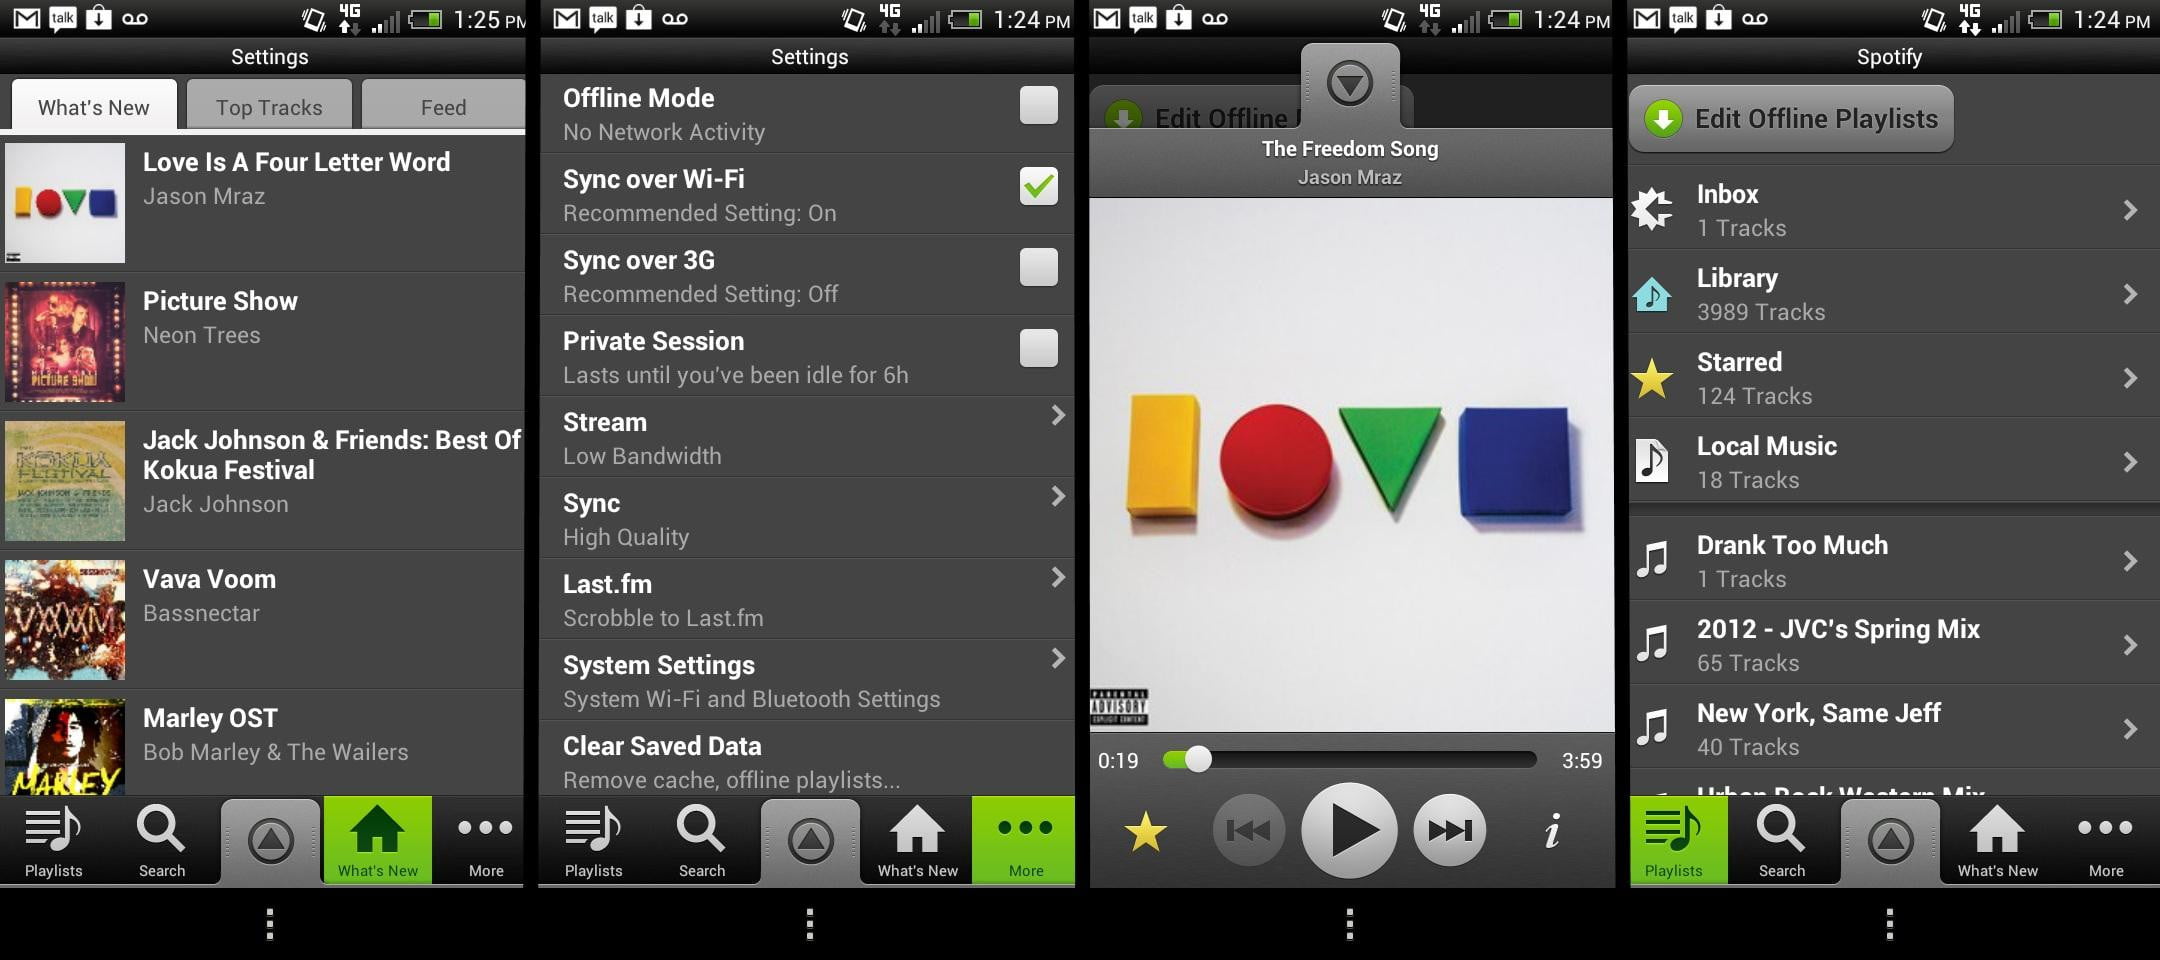 Spotify radio android app software